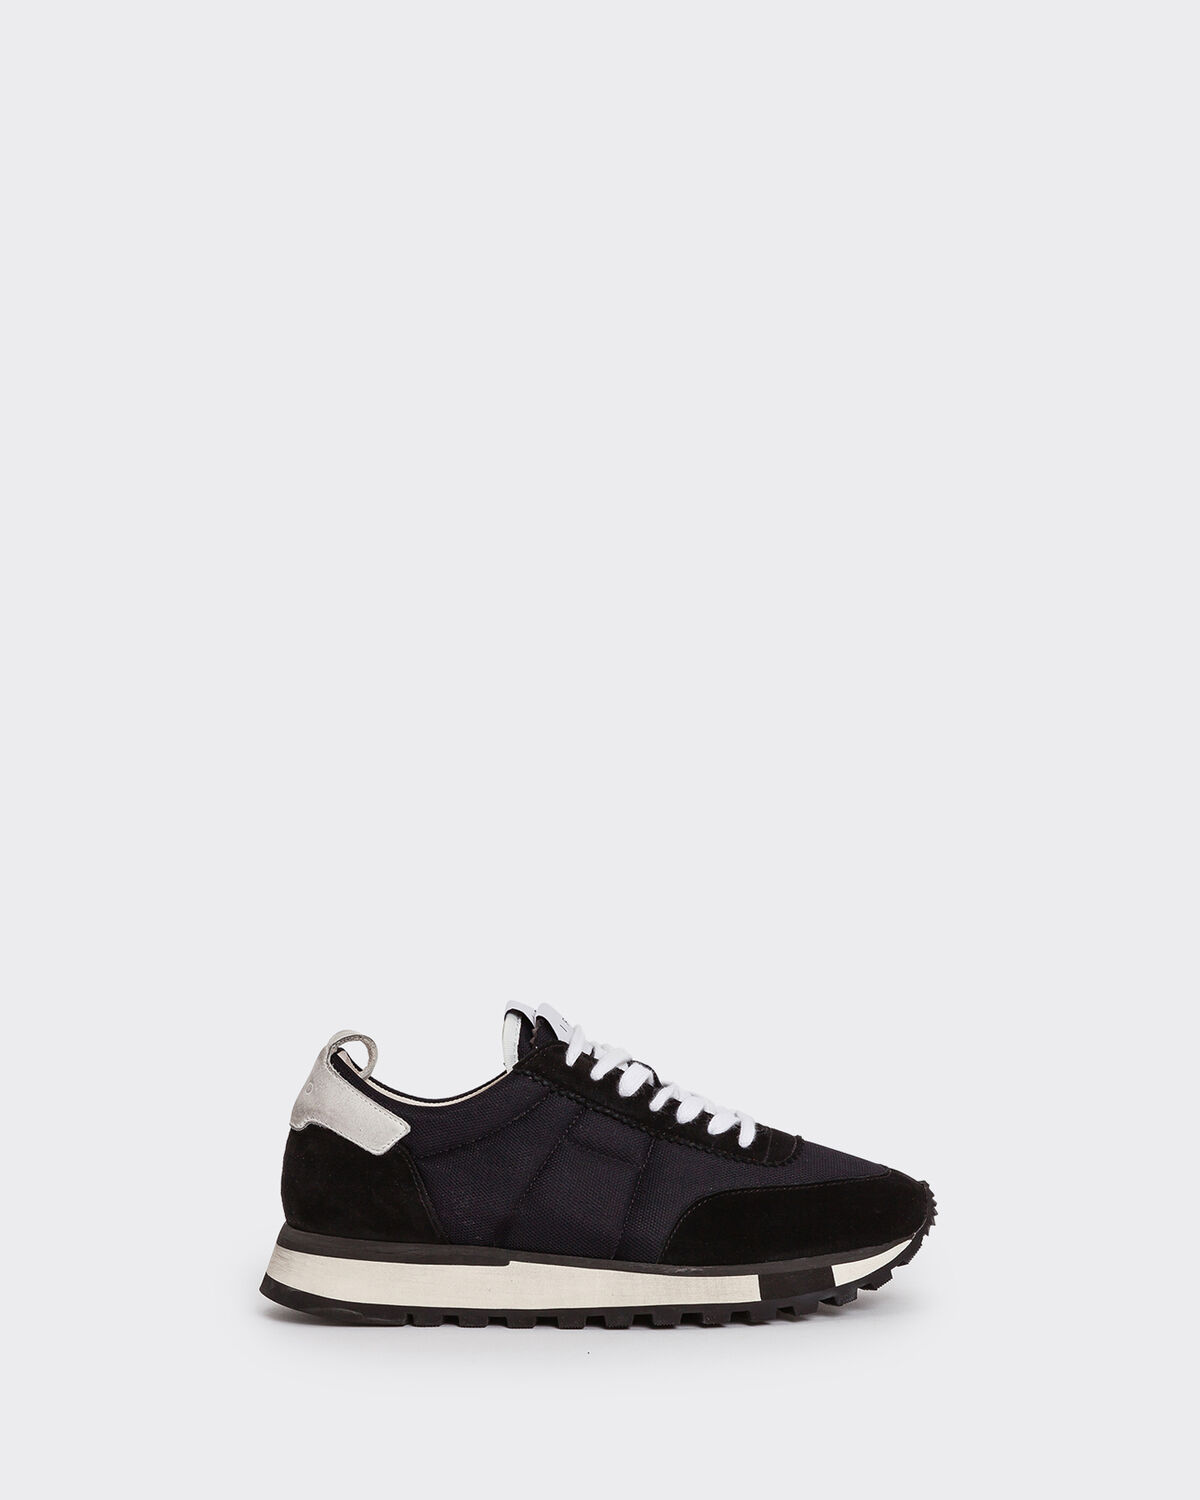 Vintager Sneakers Black And White by IRO Paris